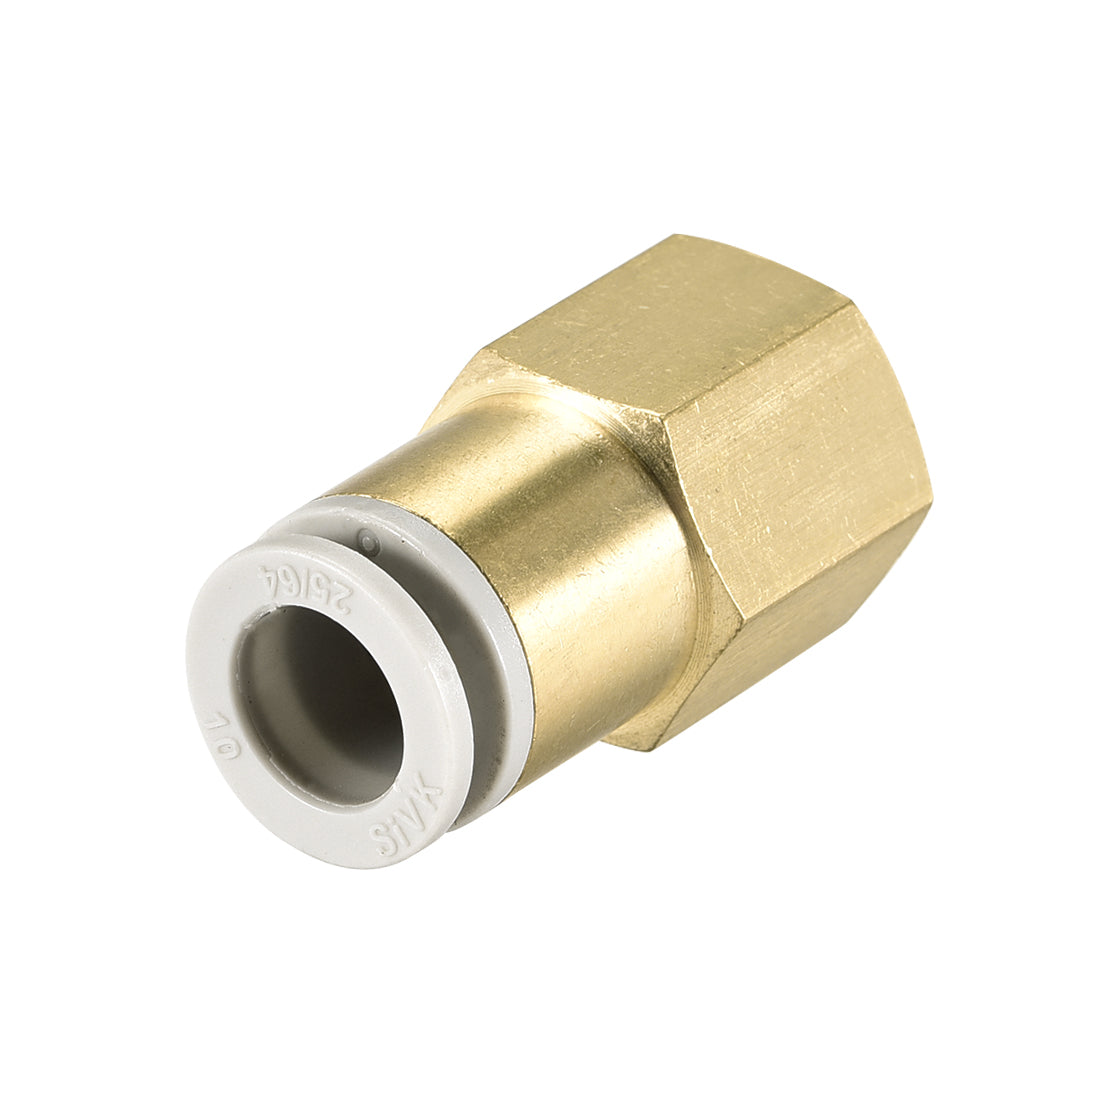 uxcell Uxcell Push to Connect Tube Fittings 10mm Tube OD x 3/8 PT Female Golden Tone